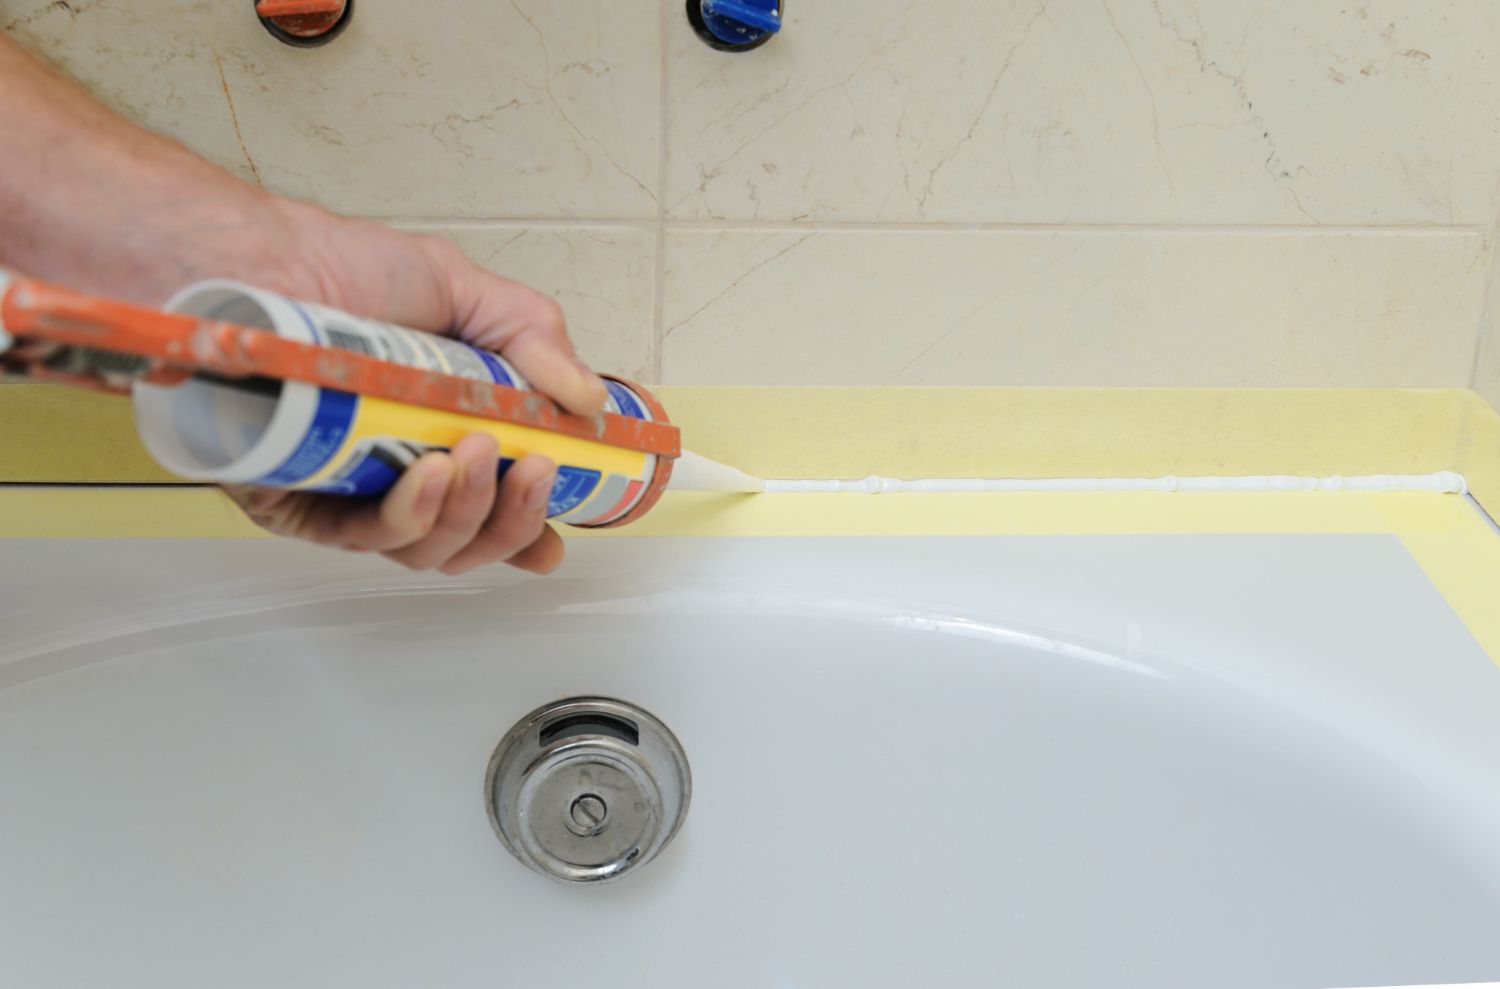 How to Correctly Caulk a Bathtub? Get the Most Ideal Tricks Here!